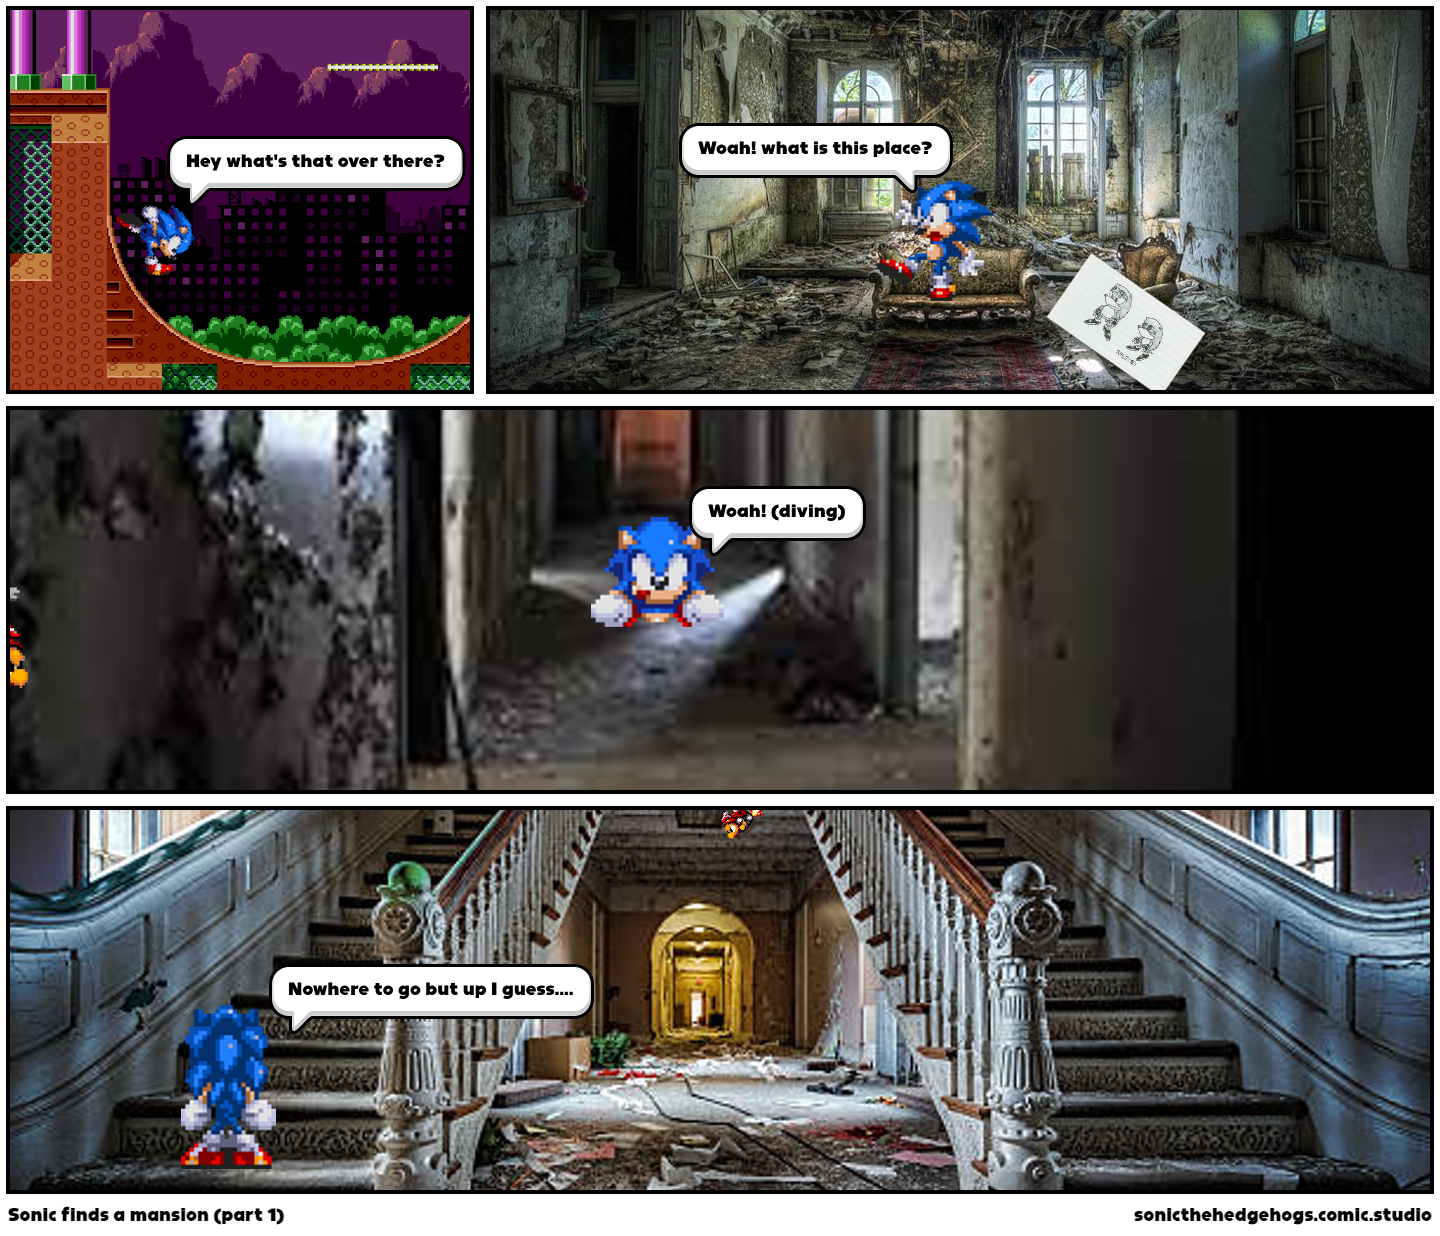 Sonic finds a mansion (part 1)